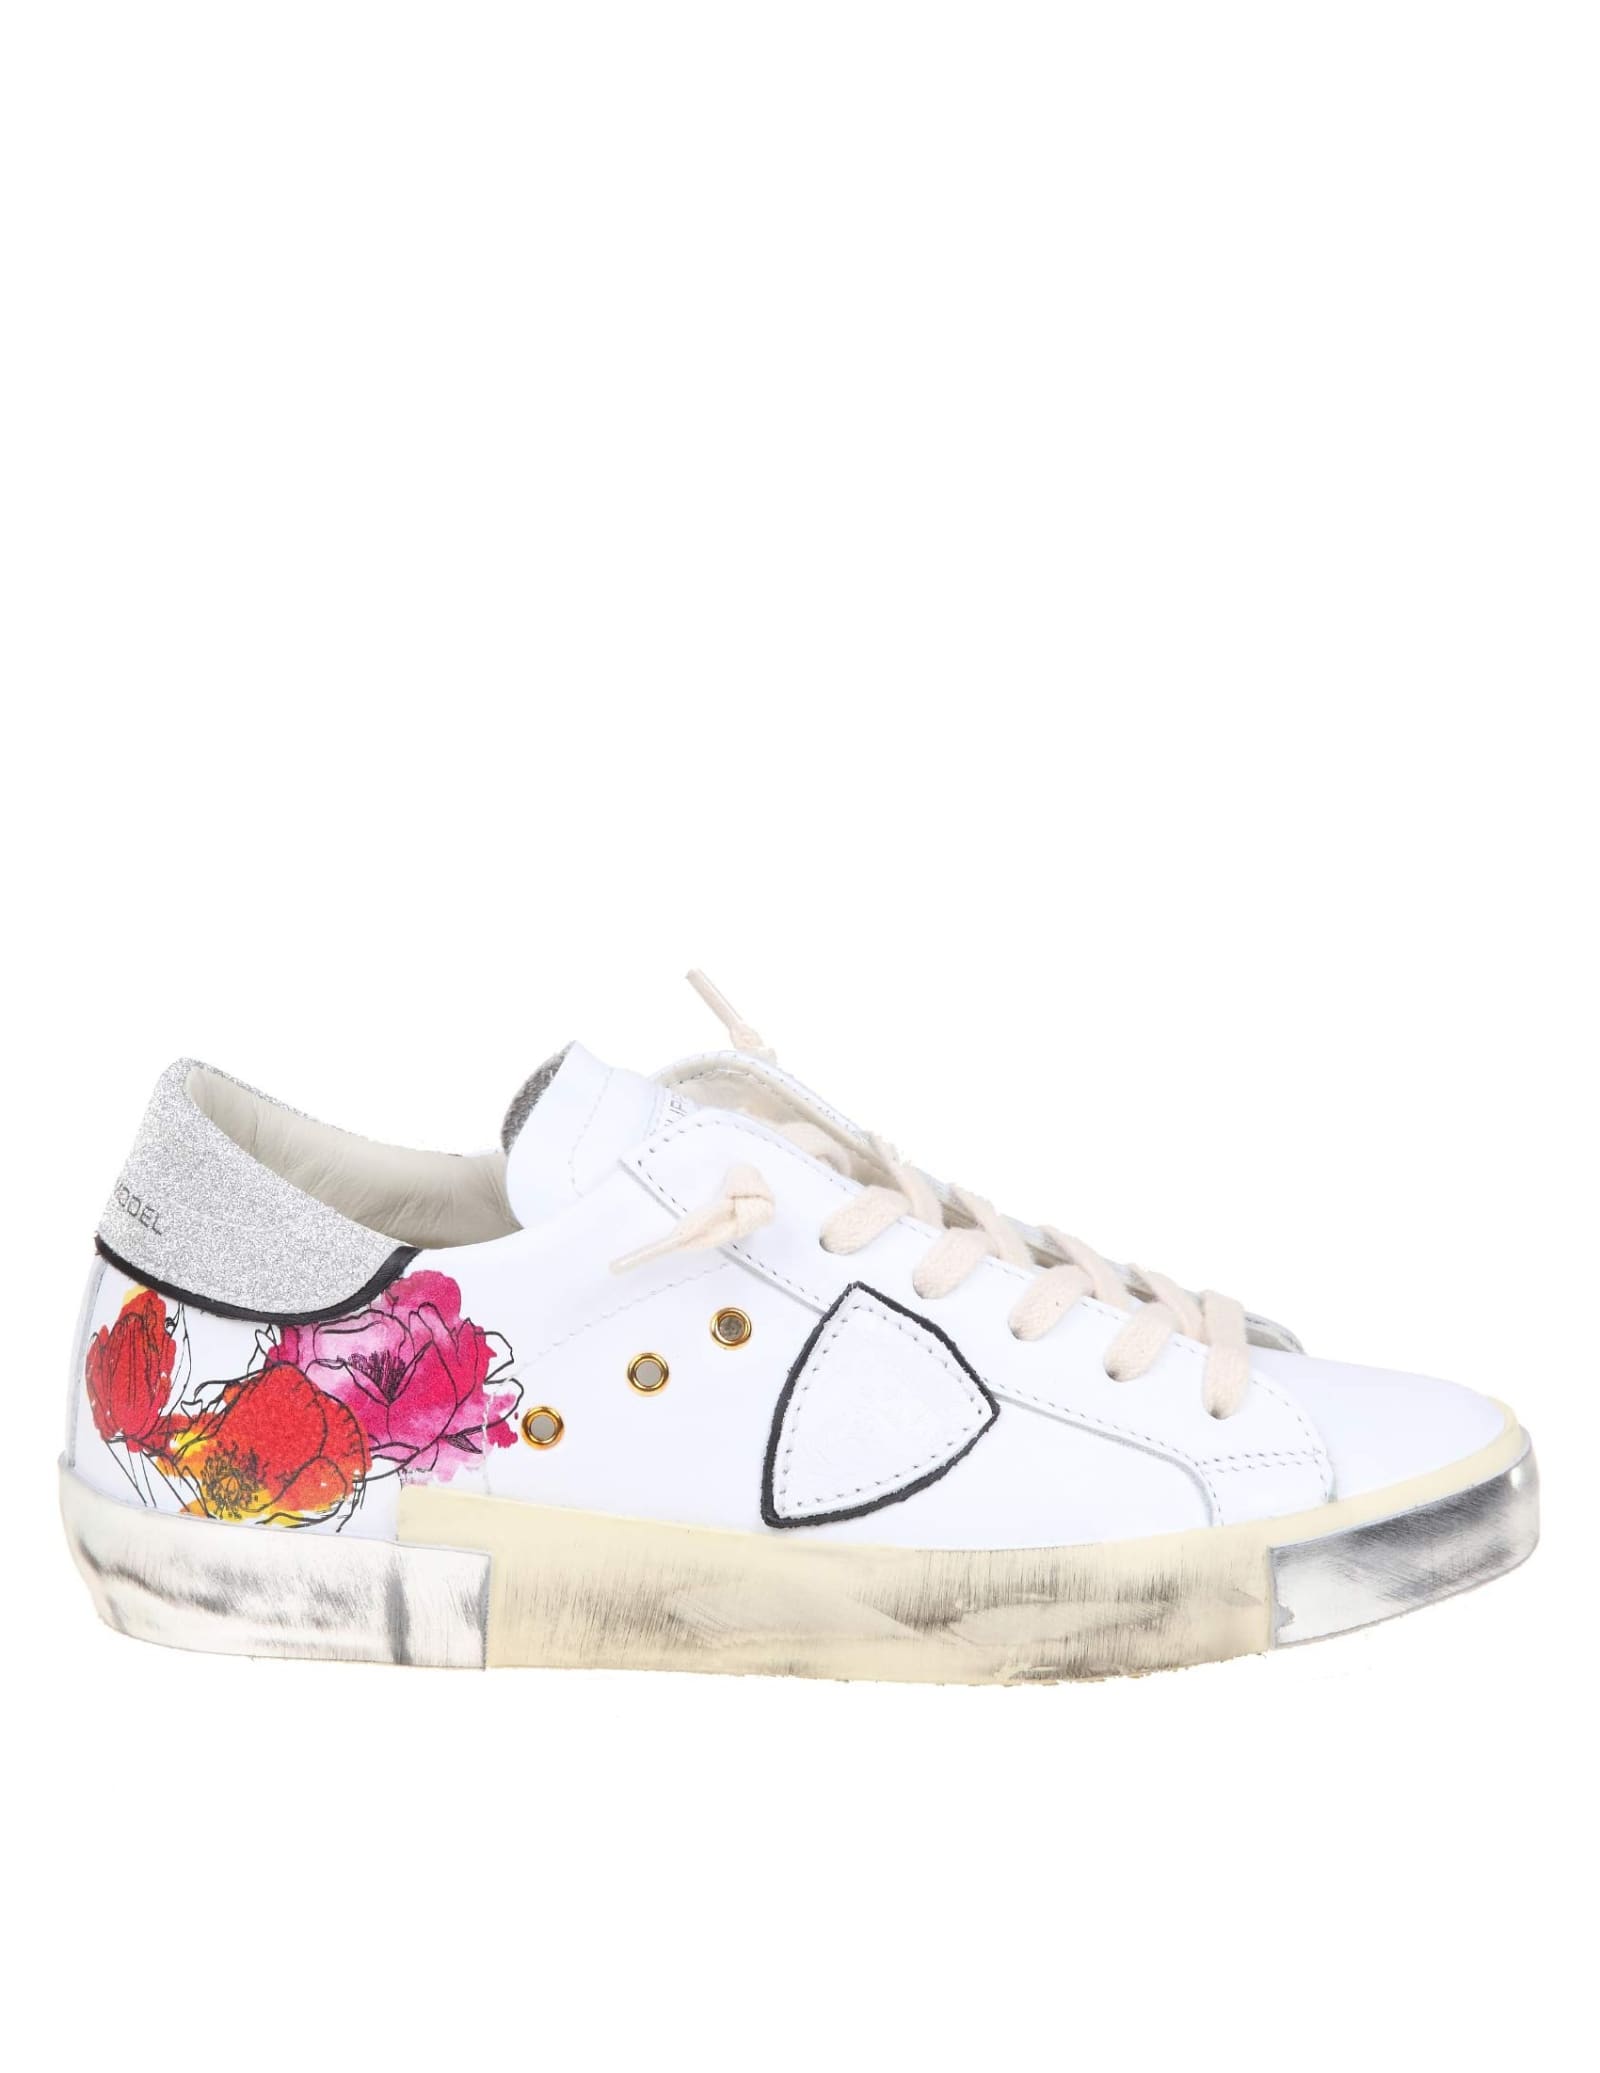 Philippe Model Sneakers Prsx Veau Fleurs In White Leather